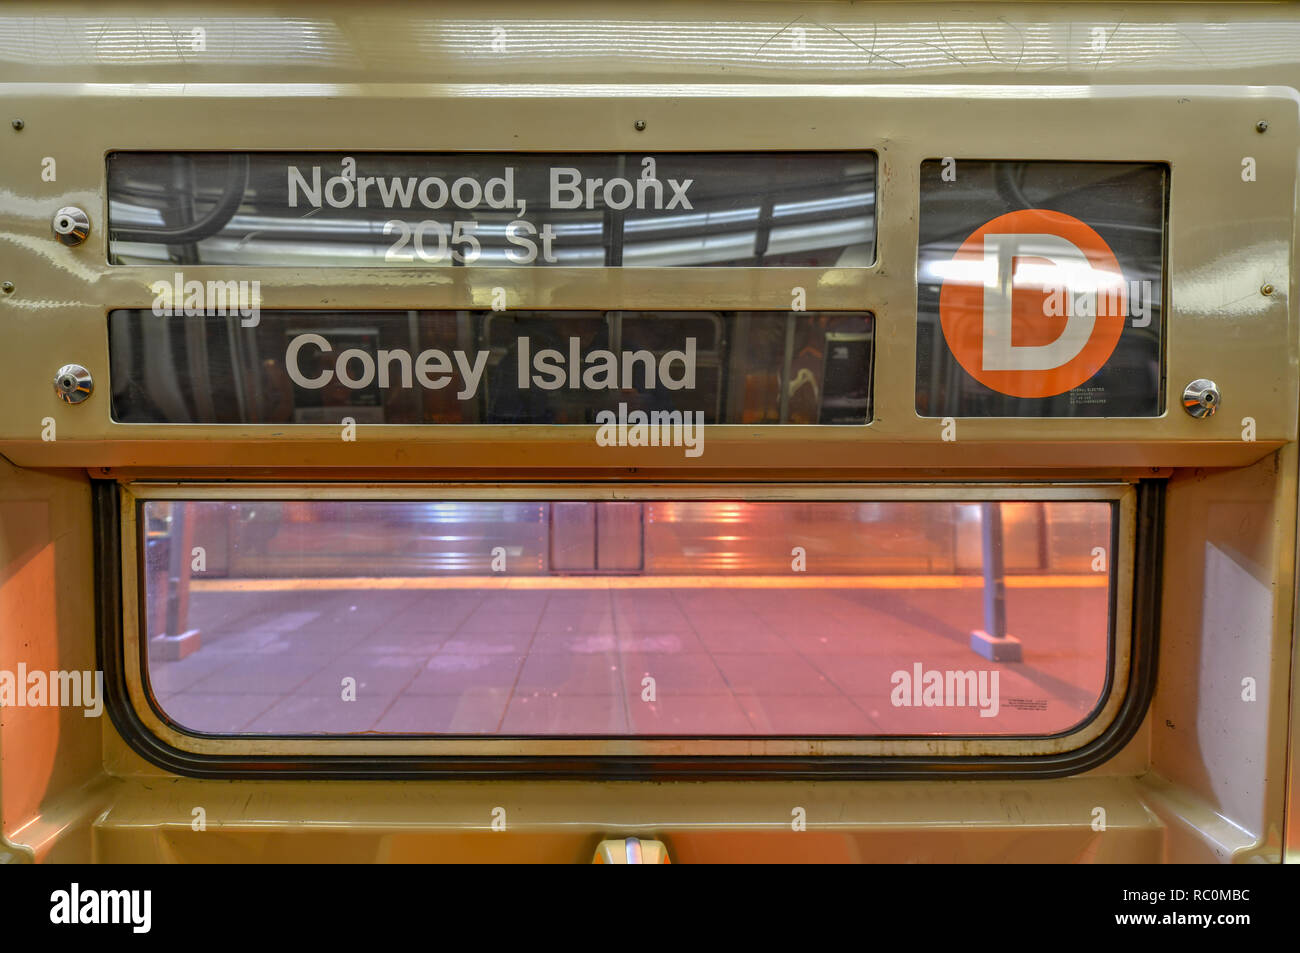 New York City - December 8, 2018: D train car in the New York City transit system. Stock Photo